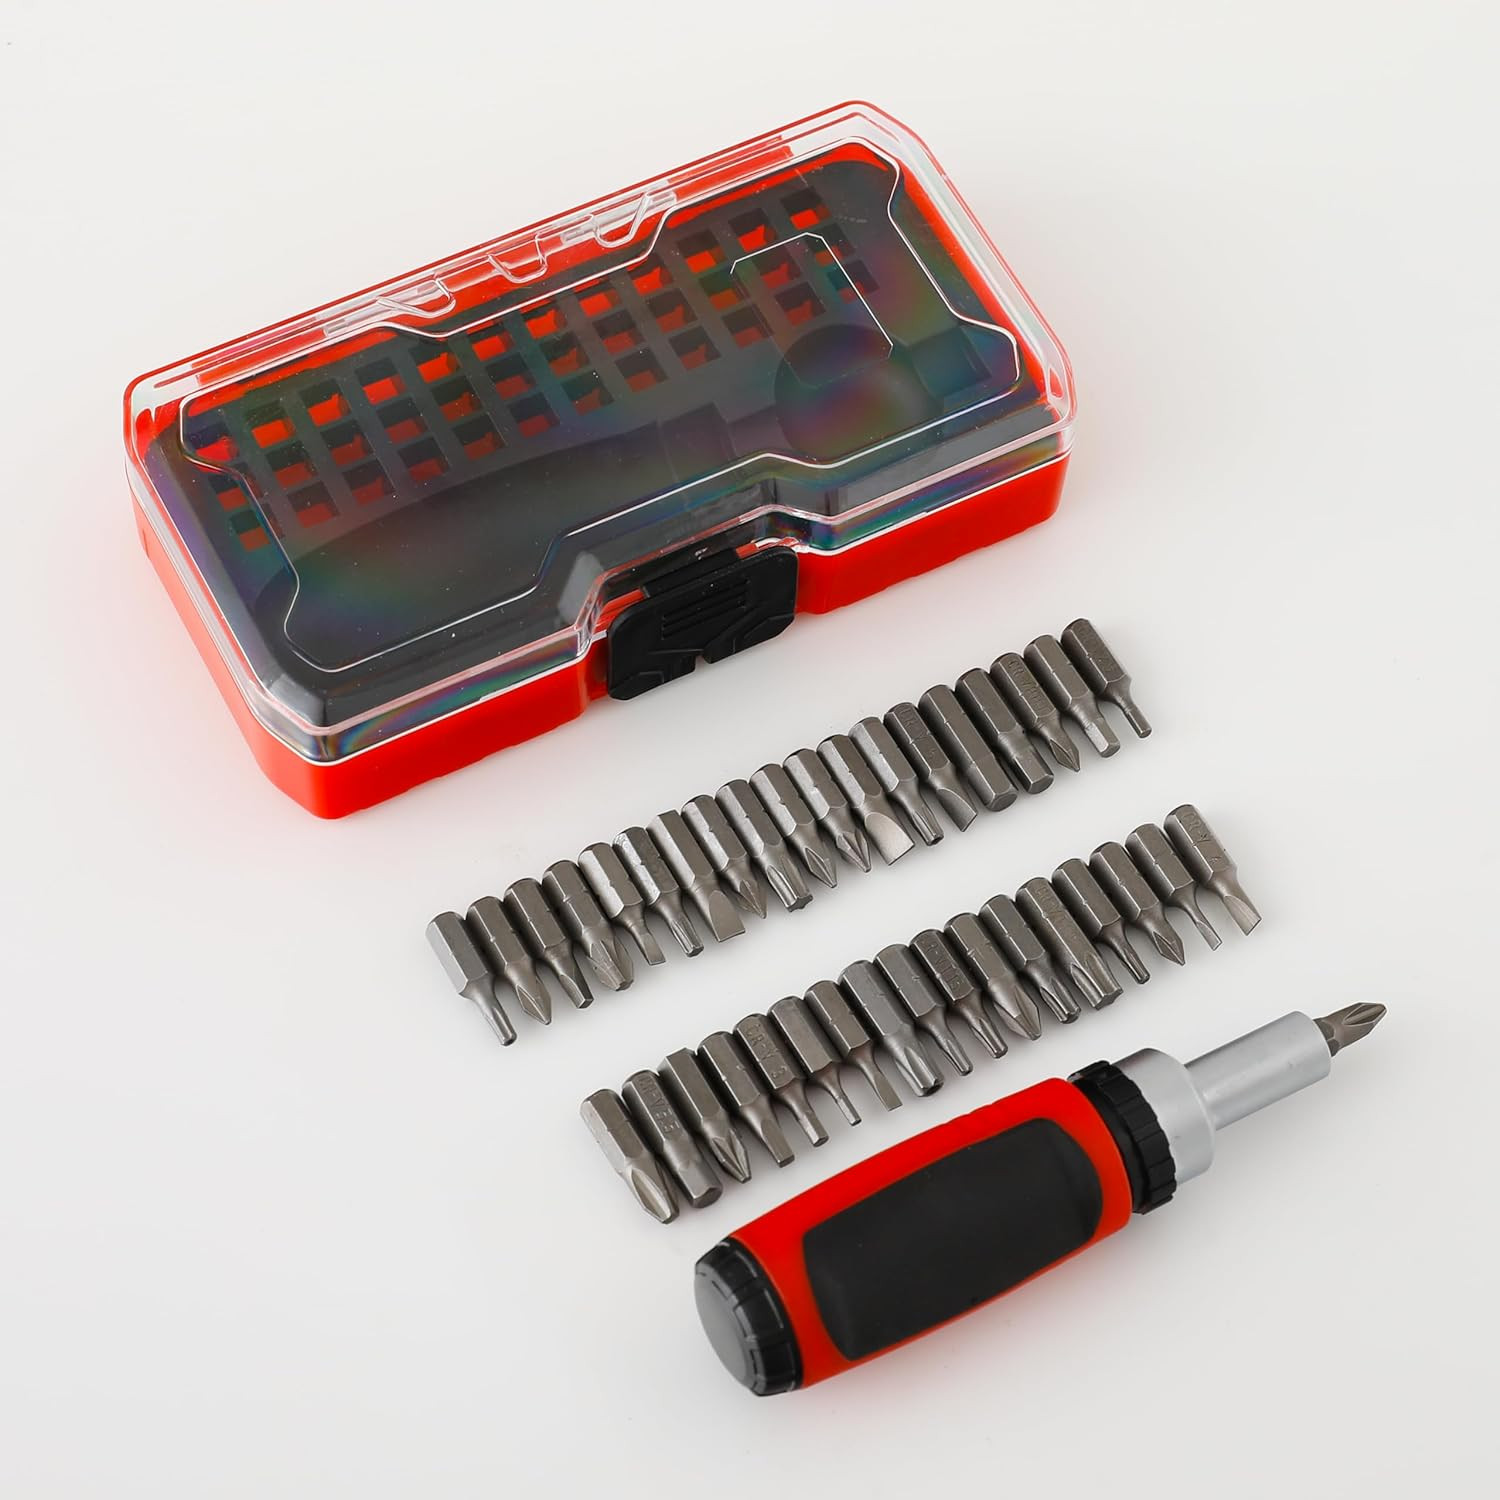 Kuber Industries Screwdriver Bits Set|38 In One With 38 Screws|Professional Magnetic Driver Set|Idol For Laptop, Mobile, Computer, Repairing Preparations (Red)